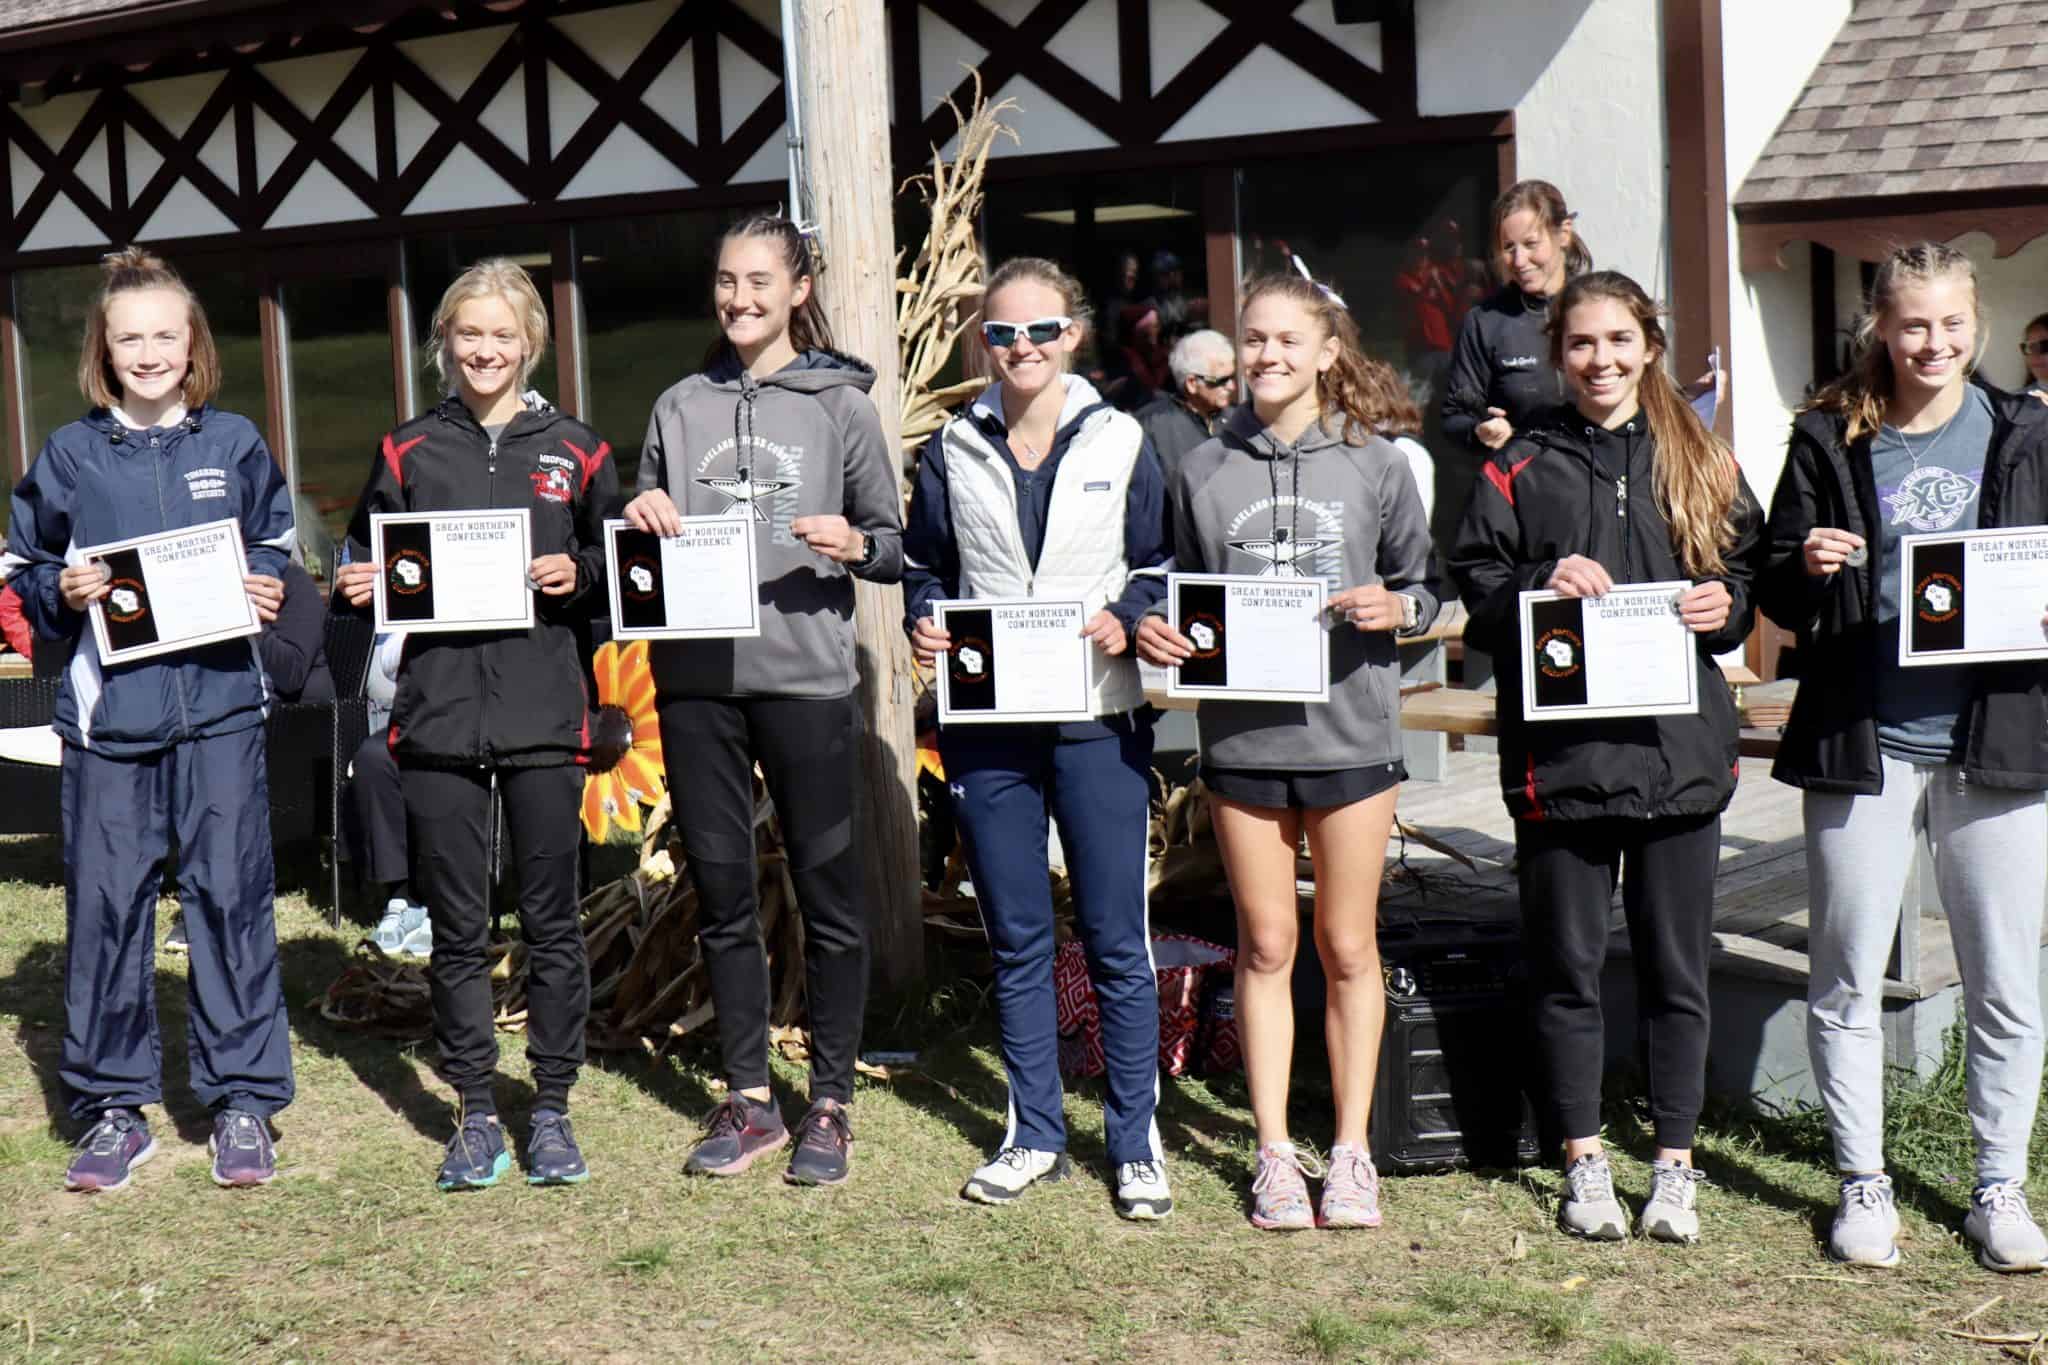 Eight Hatchet runners named to All-Conference team